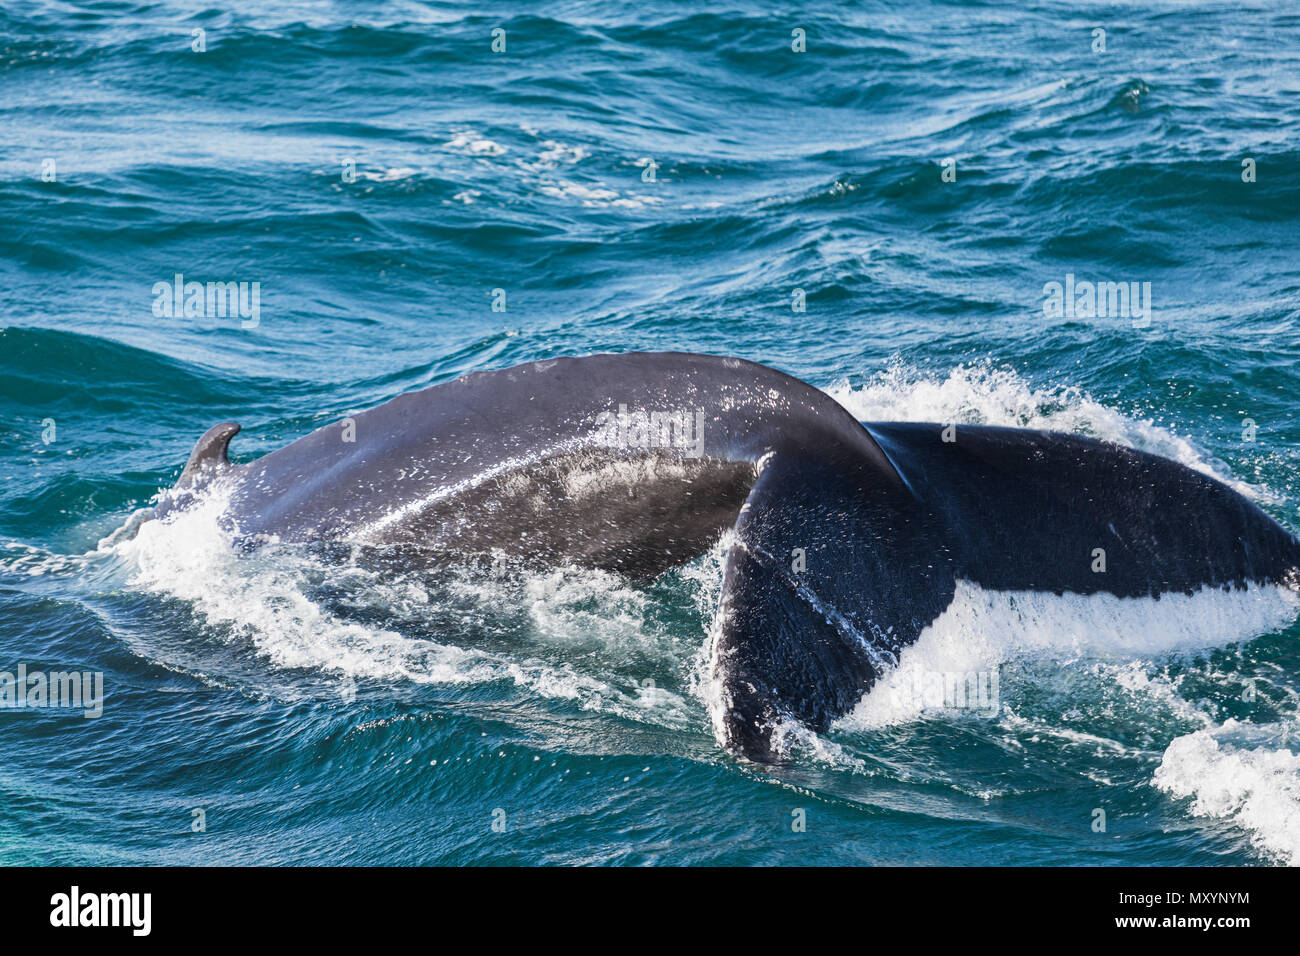 Big Humpback Whale Diving And Showing His Tail Near Husavik On Iceland Stock Photo Alamy